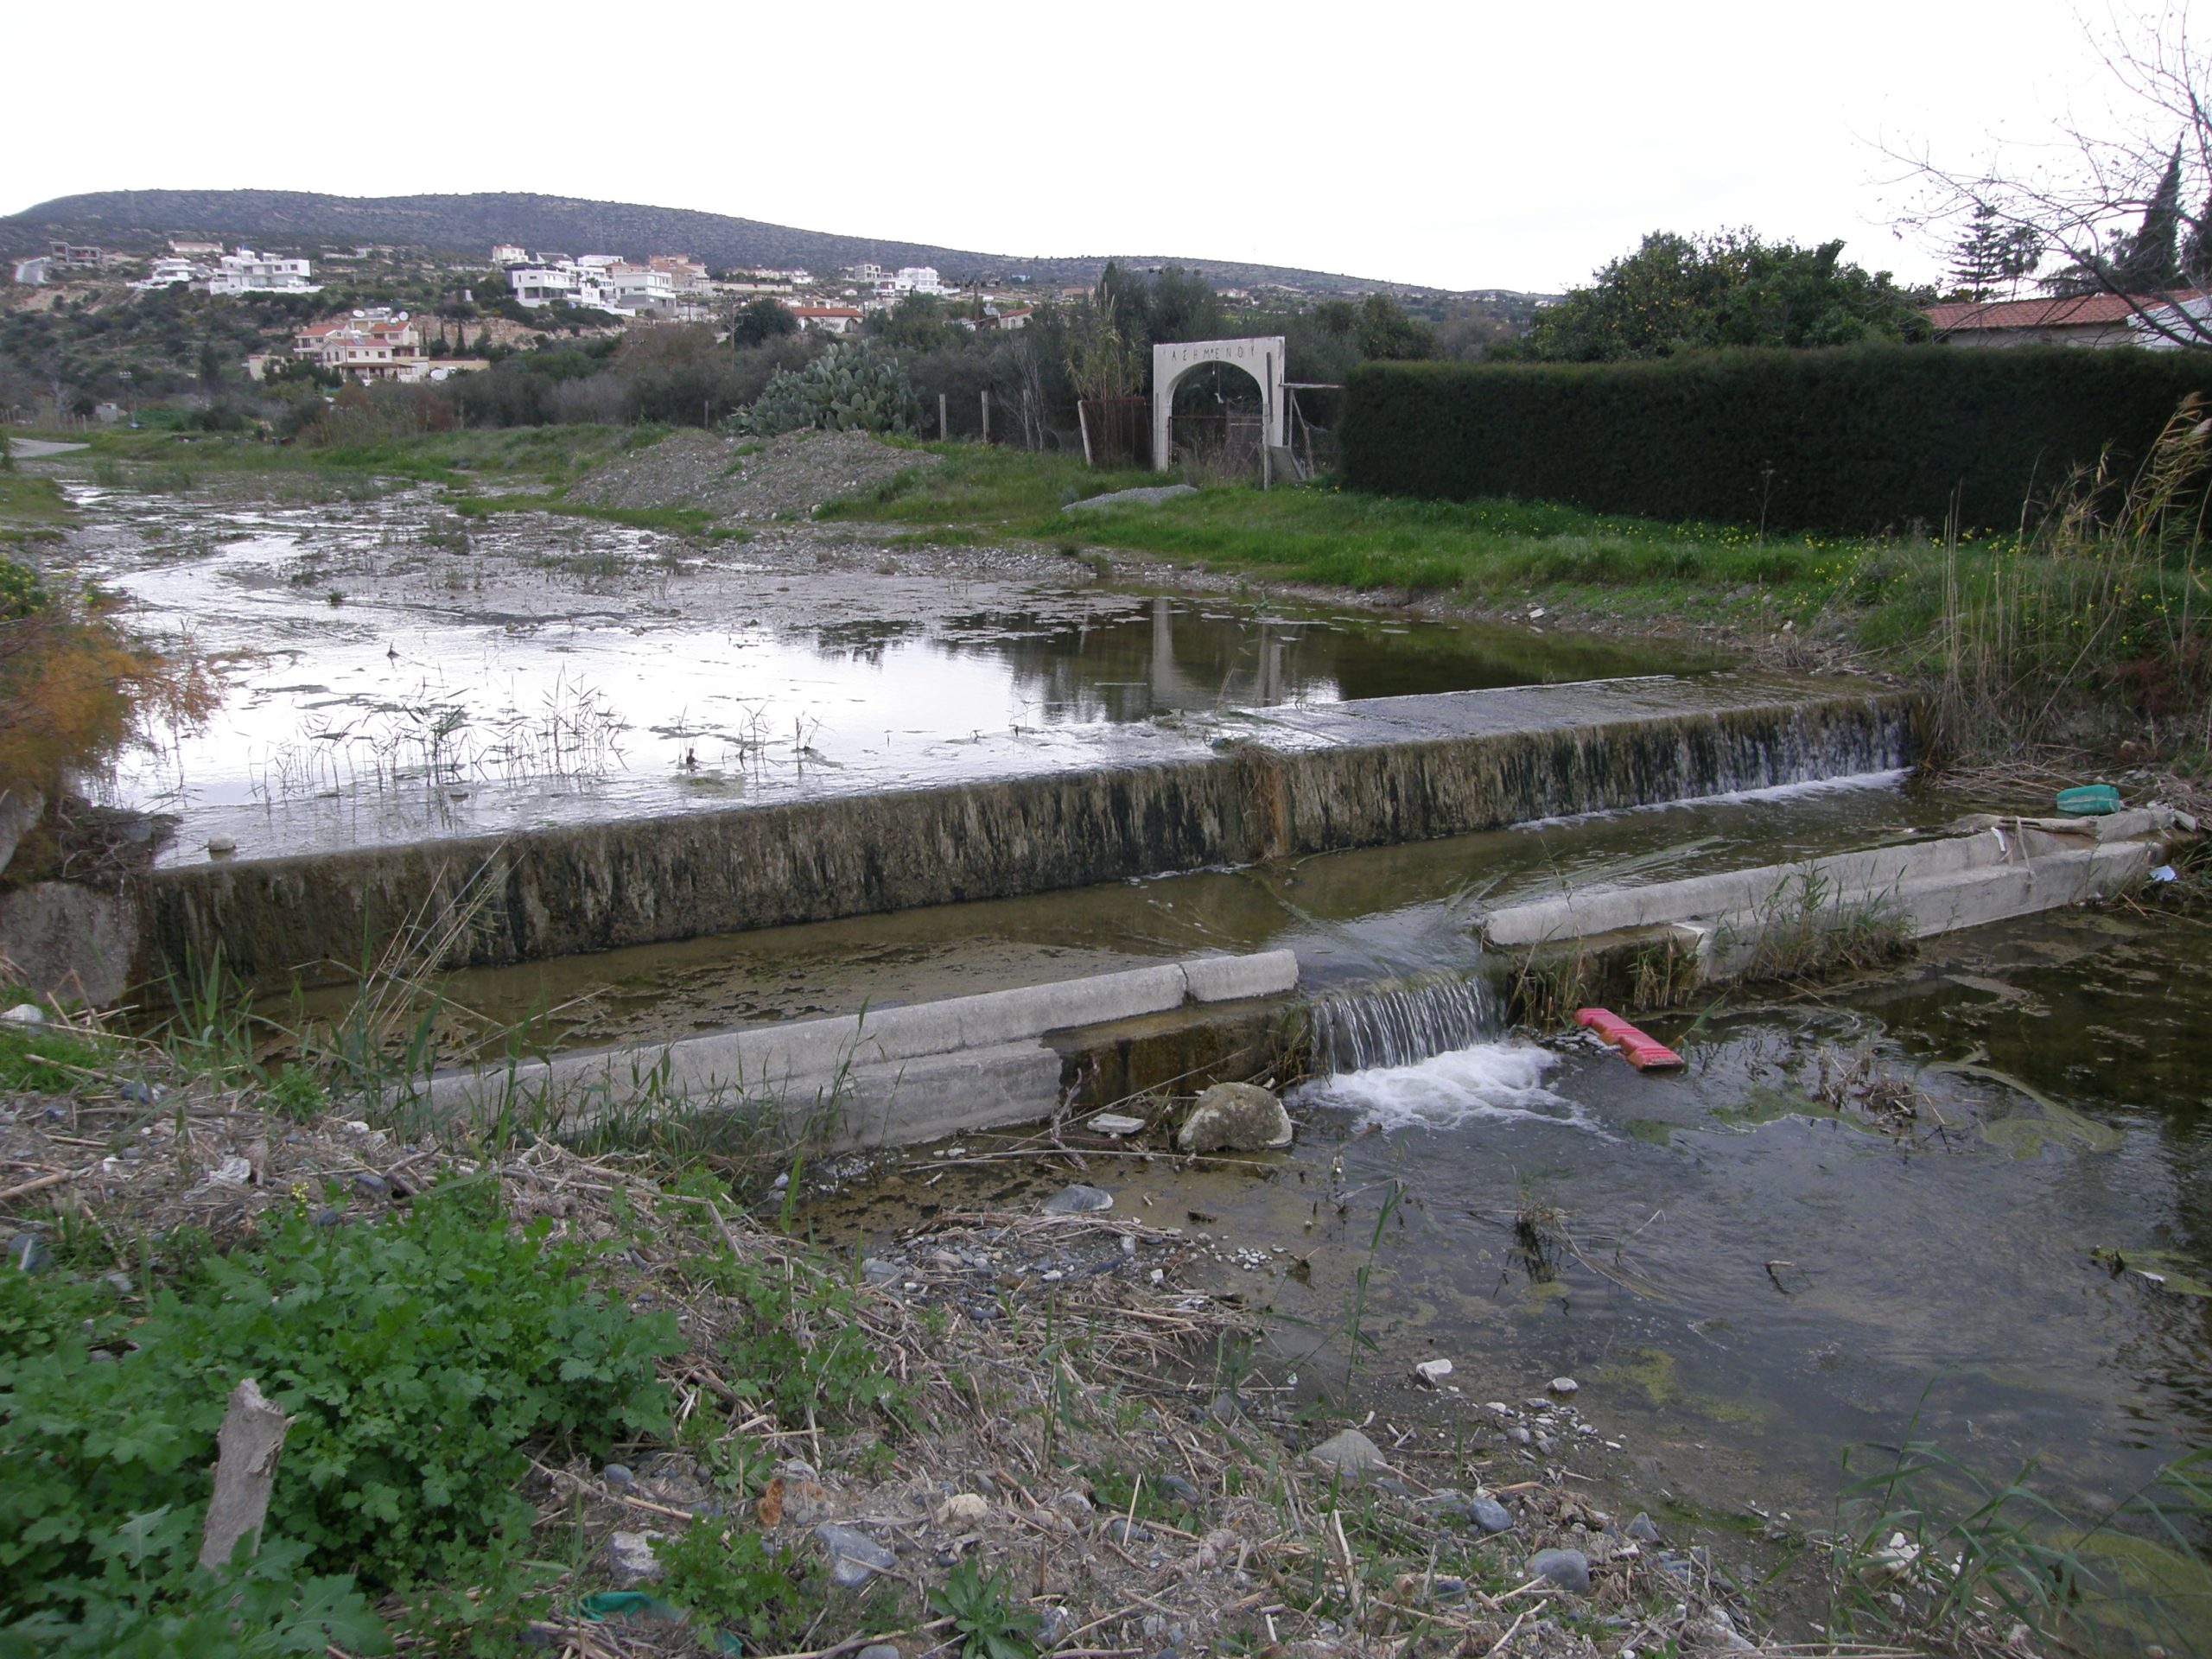 First Documented Barrier Removals in Cyprus